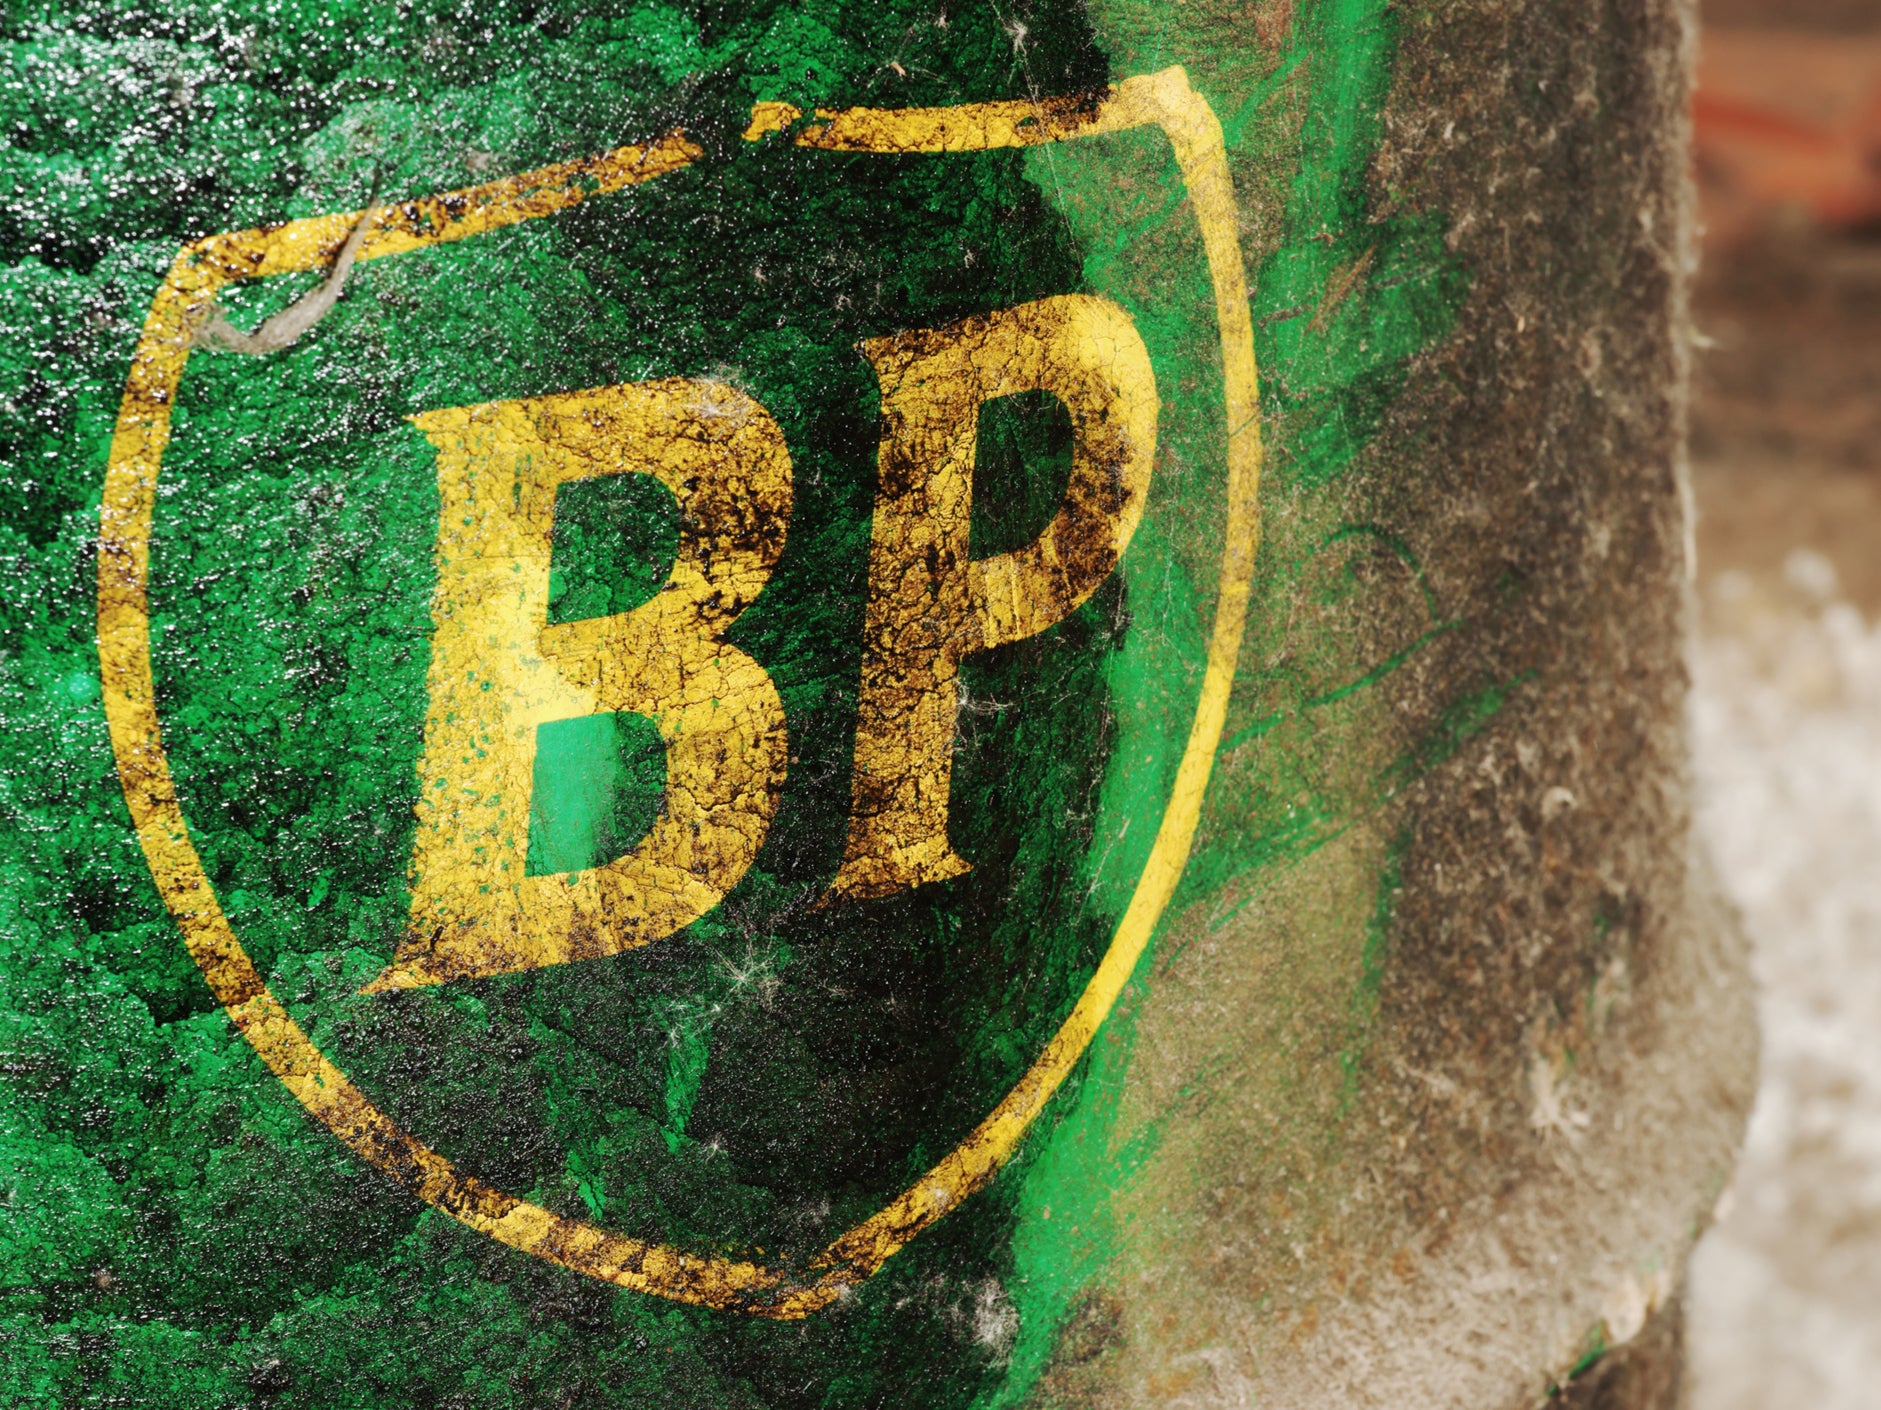 BP has made £23.4bn in profit from its operations around the world over the last year